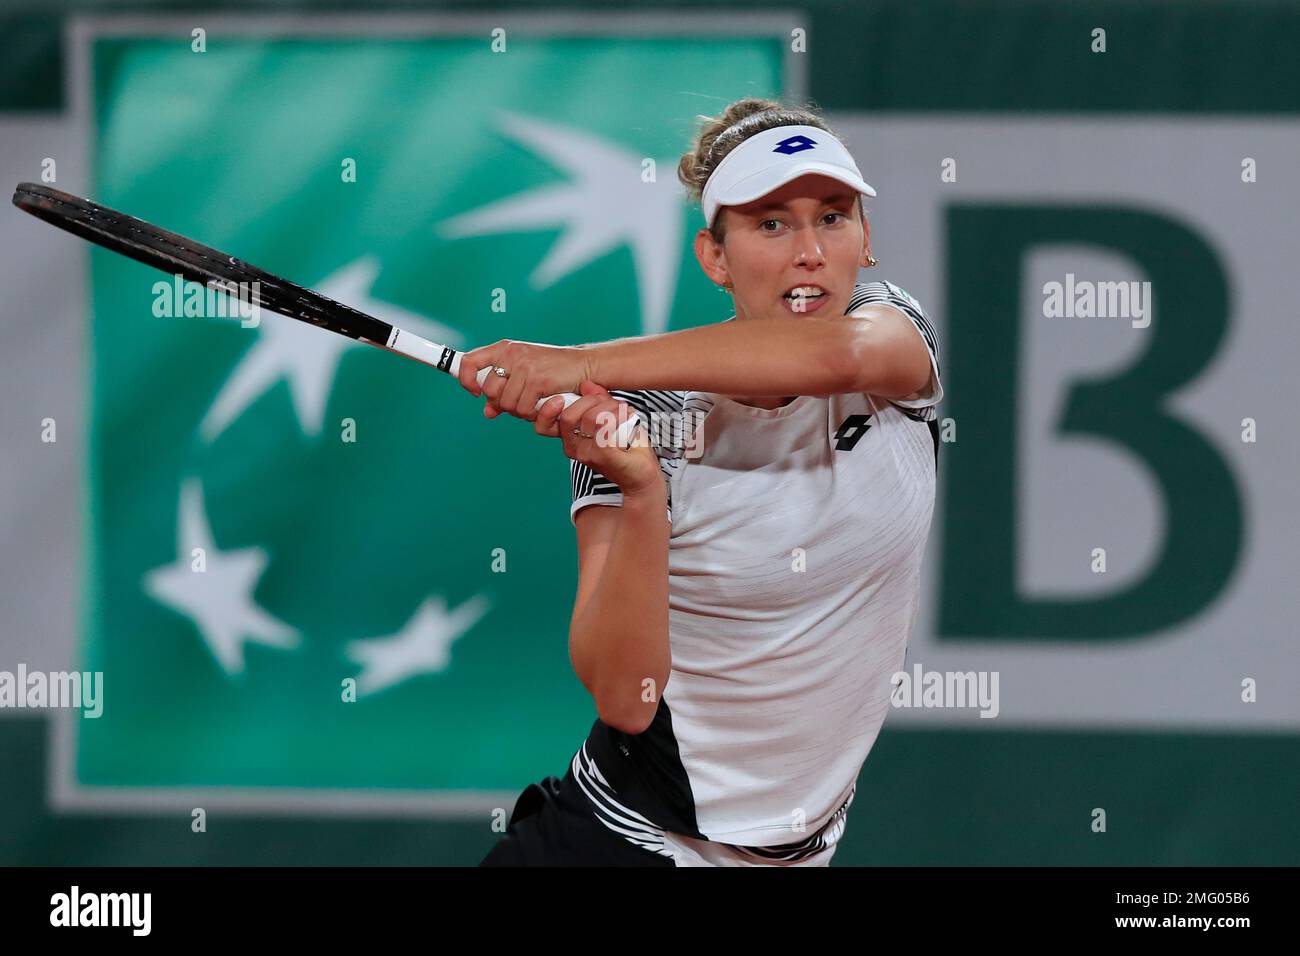 Belgium's Elise Mertens plays a shot against France's Caroline Garcia in  the third round match of the French Open tennis tournament at the Roland  Garros stadium in Paris, France, Friday, Oct. 2,